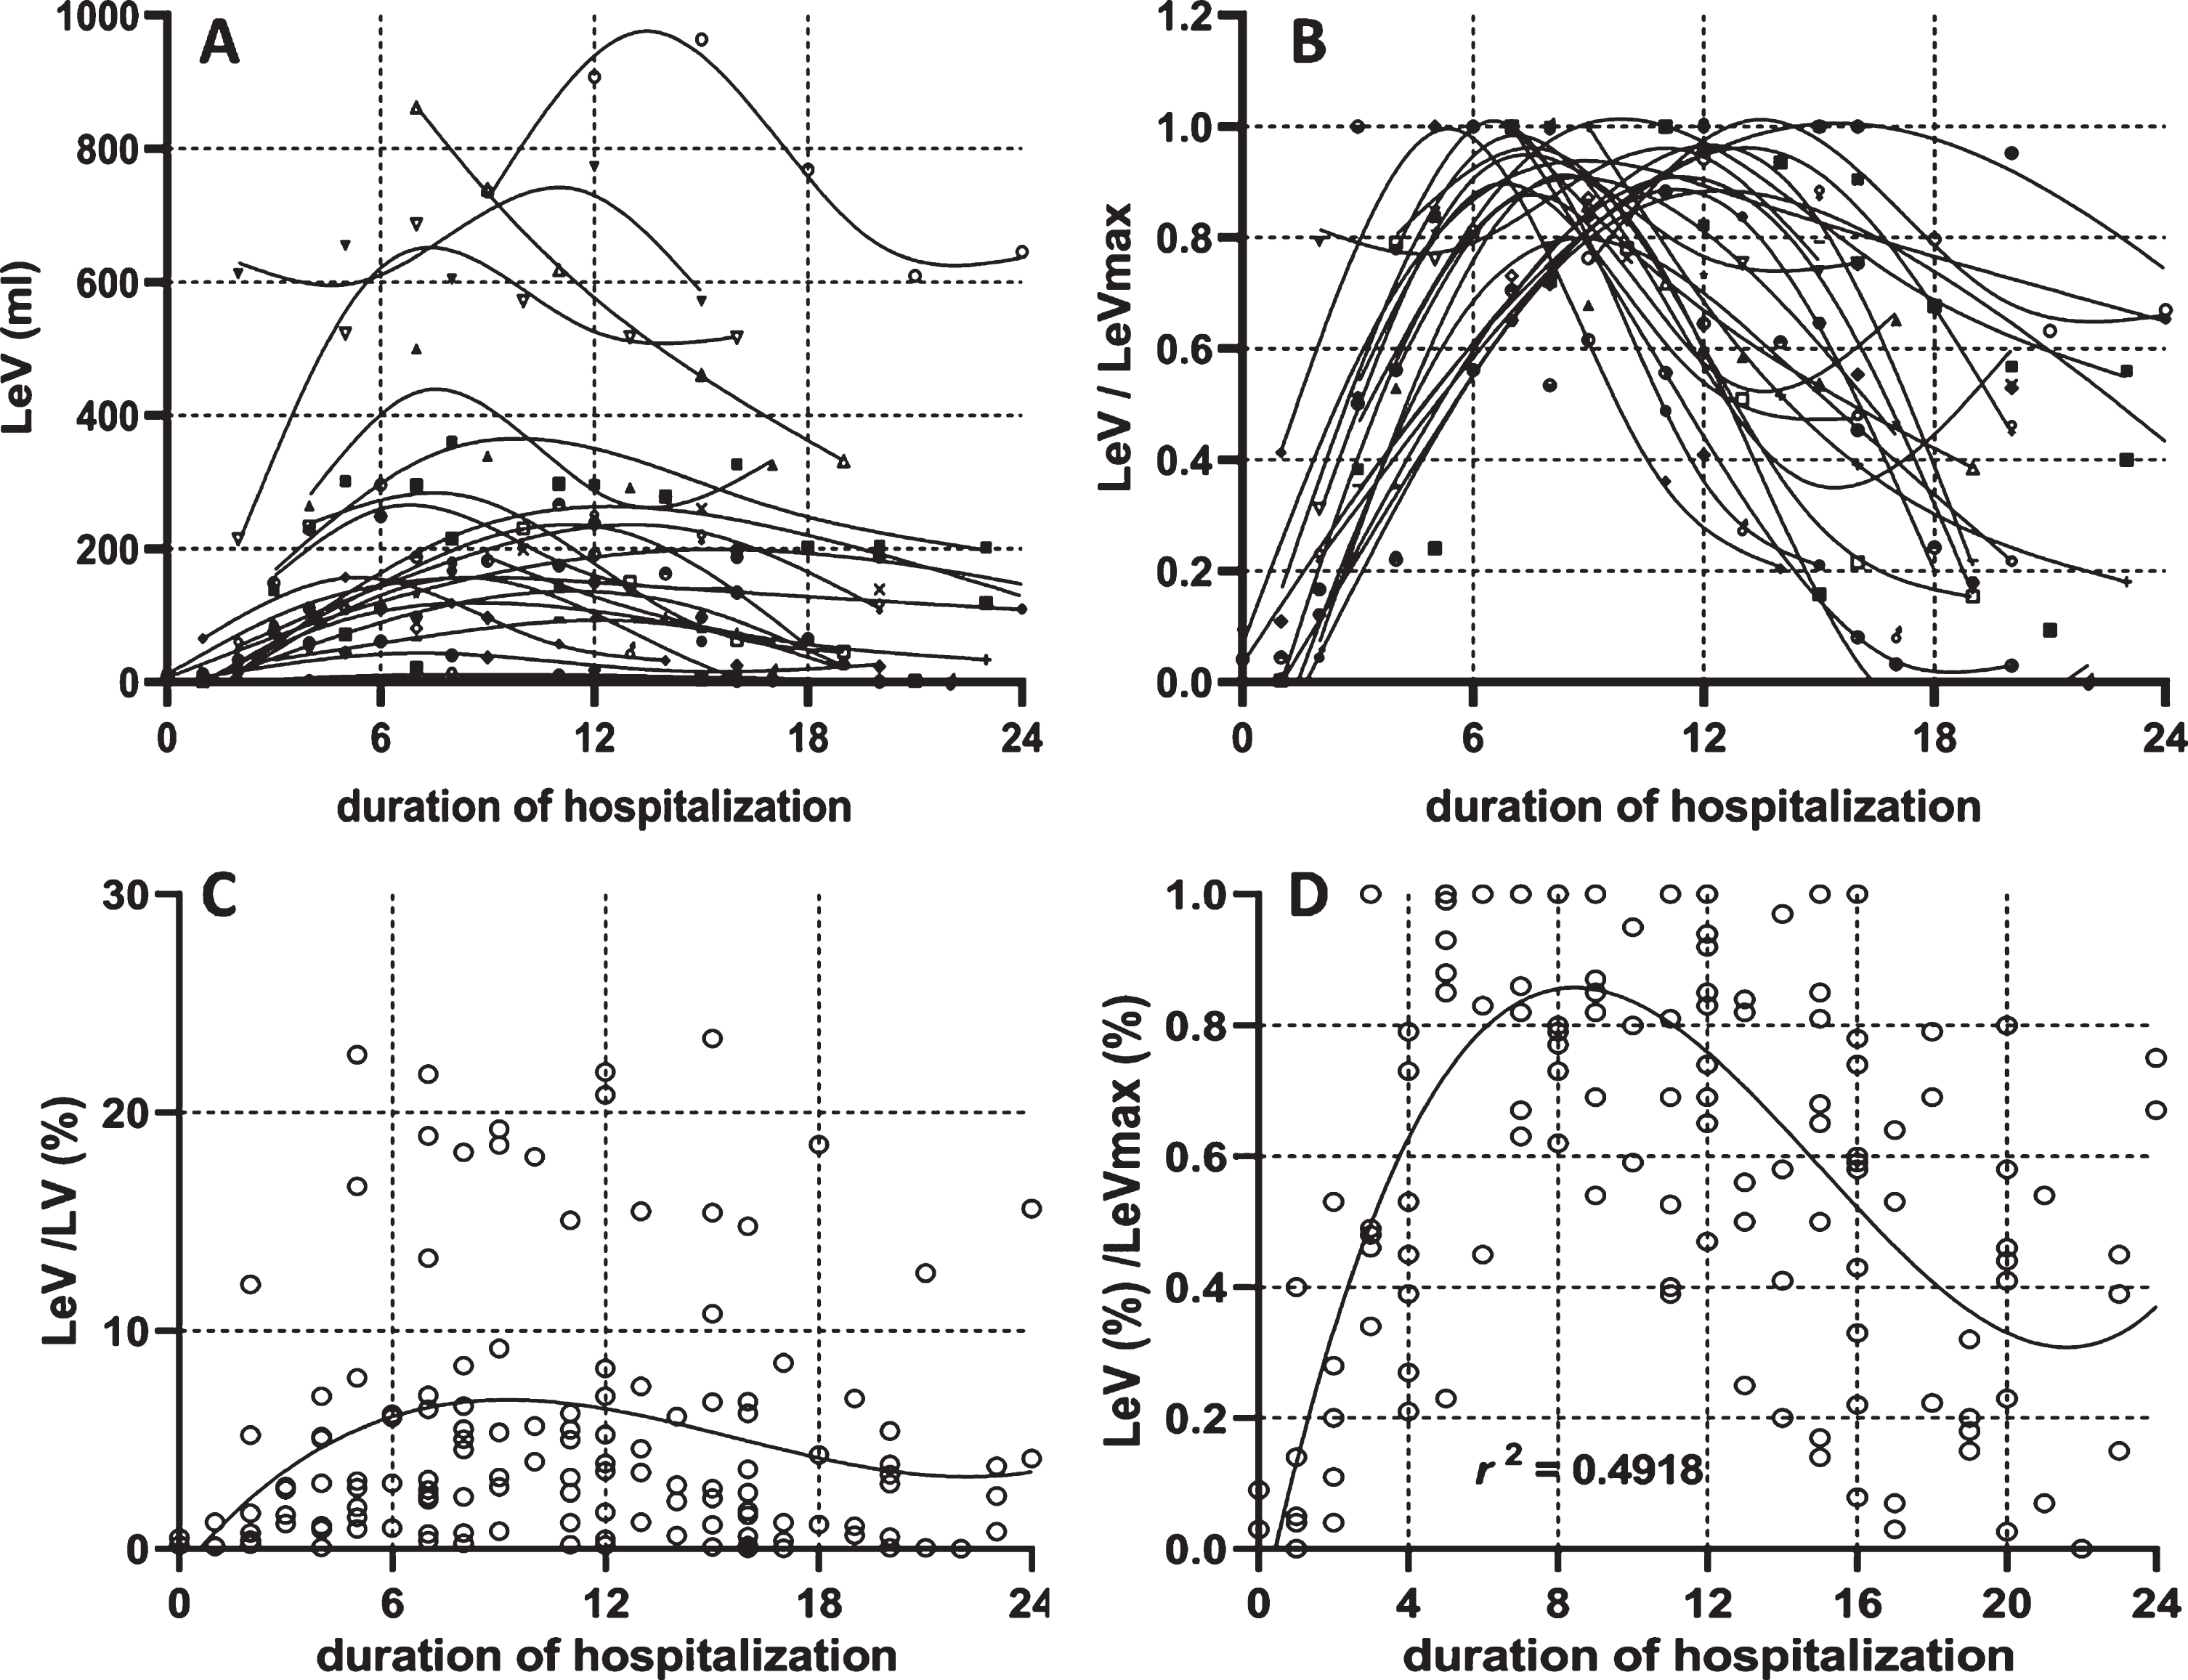 Dynamic changes of the lesion volume. The dynamic changes of lesion volume in each patient (4-A) was plotted with a specific symbol according to the scan timing within the whole course. The lesion volume was divided by its maximal value among the entire duration (4-B). The dynamic changes of lesion percentage in general patients were plotted in Fig. 4-C according to the scan time during the whole course. The lesion percentage was standardized by its maximal value in the entire duration (4-D).